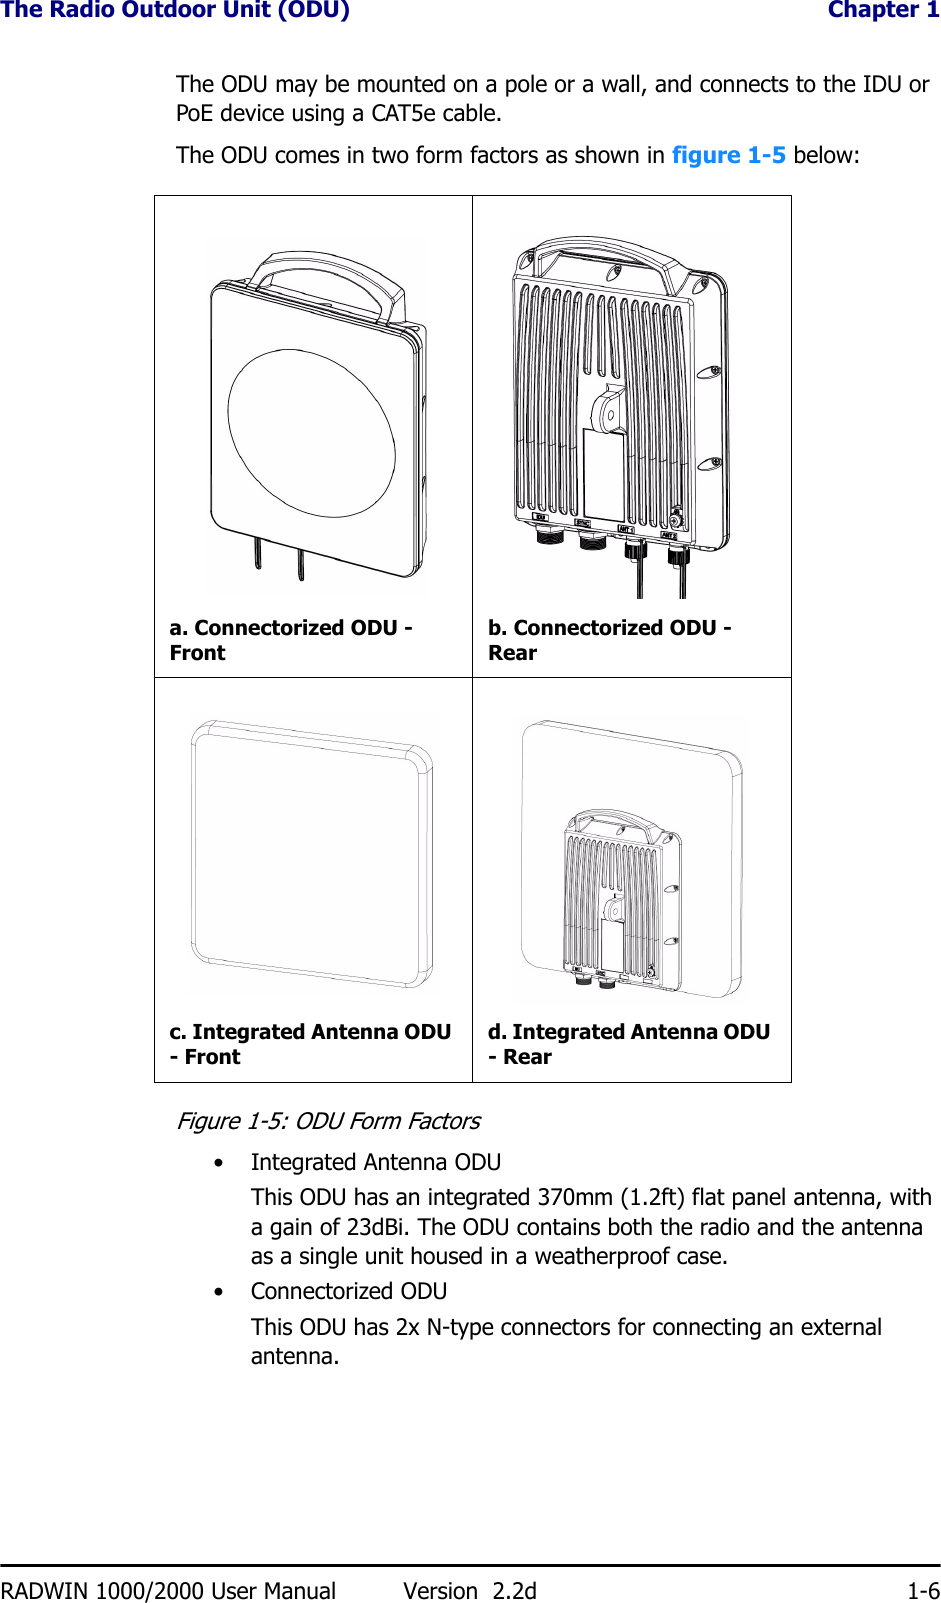 The Radio Outdoor Unit (ODU)  Chapter 1RADWIN 1000/2000 User Manual Version  2.2d 1-6The ODU may be mounted on a pole or a wall, and connects to the IDU or PoE device using a CAT5e cable.The ODU comes in two form factors as shown in figure 1-5 below:Figure 1-5: ODU Form Factors• Integrated Antenna ODUThis ODU has an integrated 370mm (1.2ft) flat panel antenna, with a gain of 23dBi. The ODU contains both the radio and the antenna as a single unit housed in a weatherproof case.•Connectorized ODUThis ODU has 2x N-type connectors for connecting an external antenna.a. Connectorized ODU - Frontb. Connectorized ODU - Rearc. Integrated Antenna ODU - Frontd. Integrated Antenna ODU - Rear